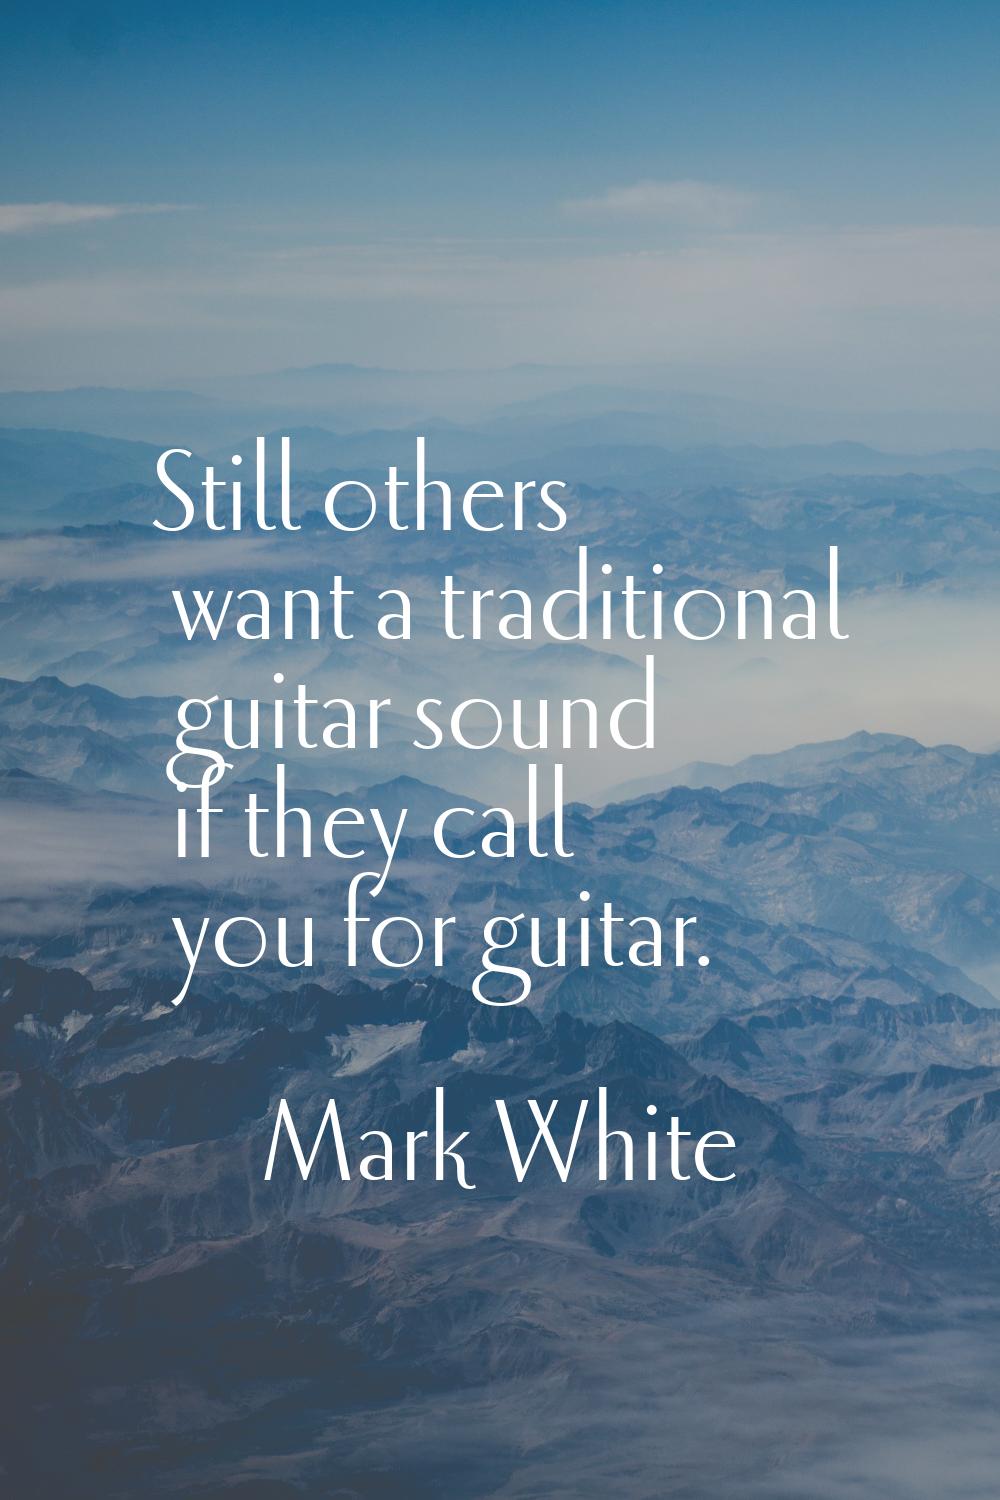 Still others want a traditional guitar sound if they call you for guitar.